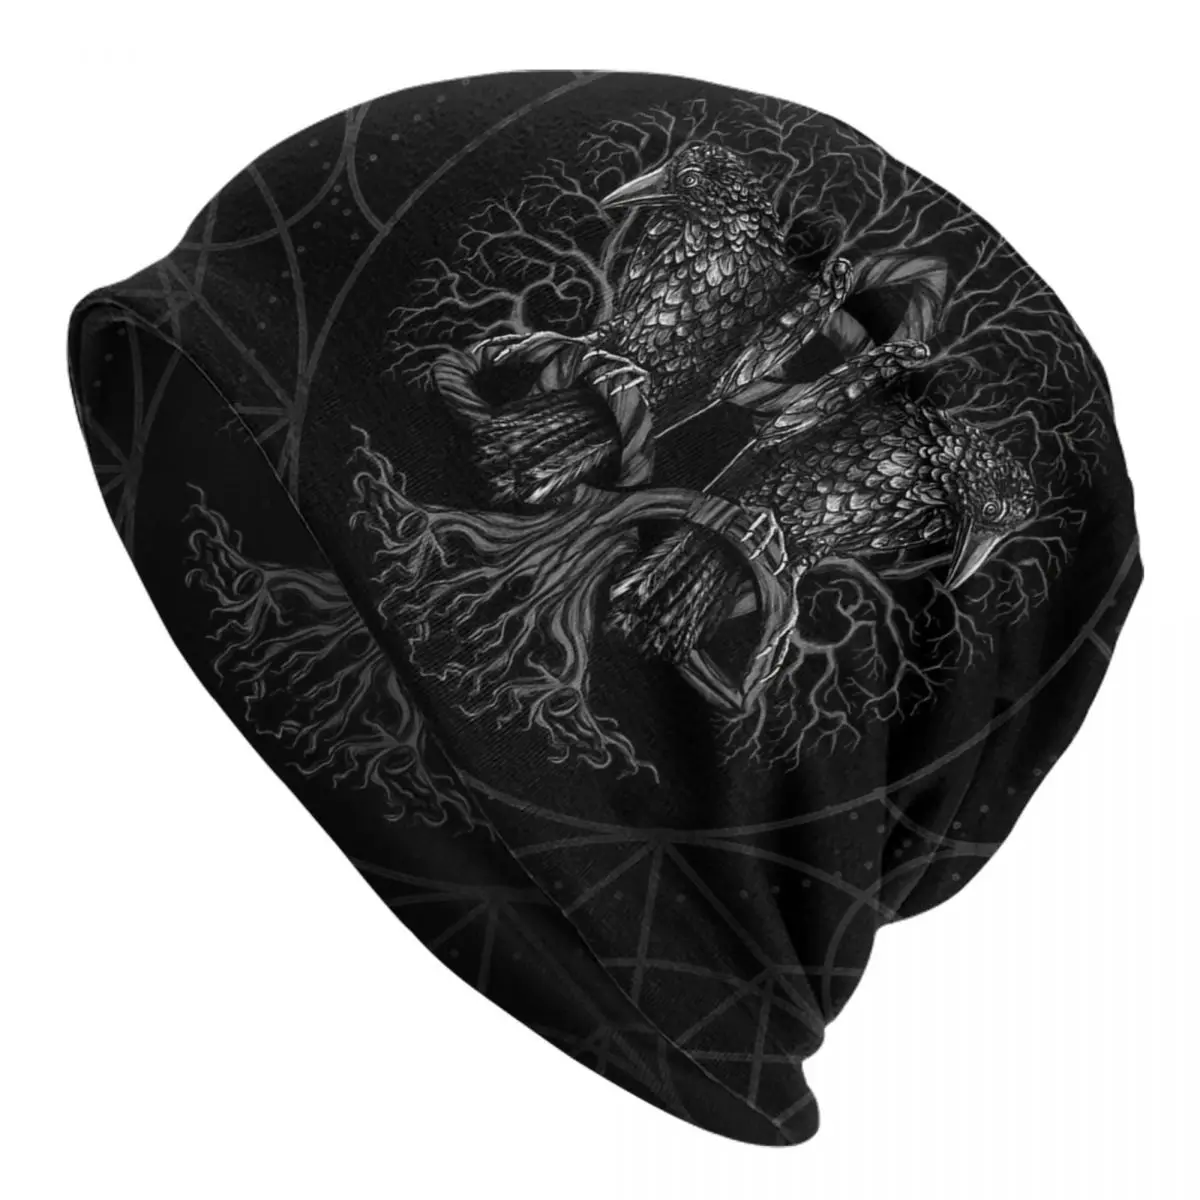 Tree Of Life -Yggdrasil With Ravens Adult Men's Women's Knit Hat Keep warm winter knitted hat